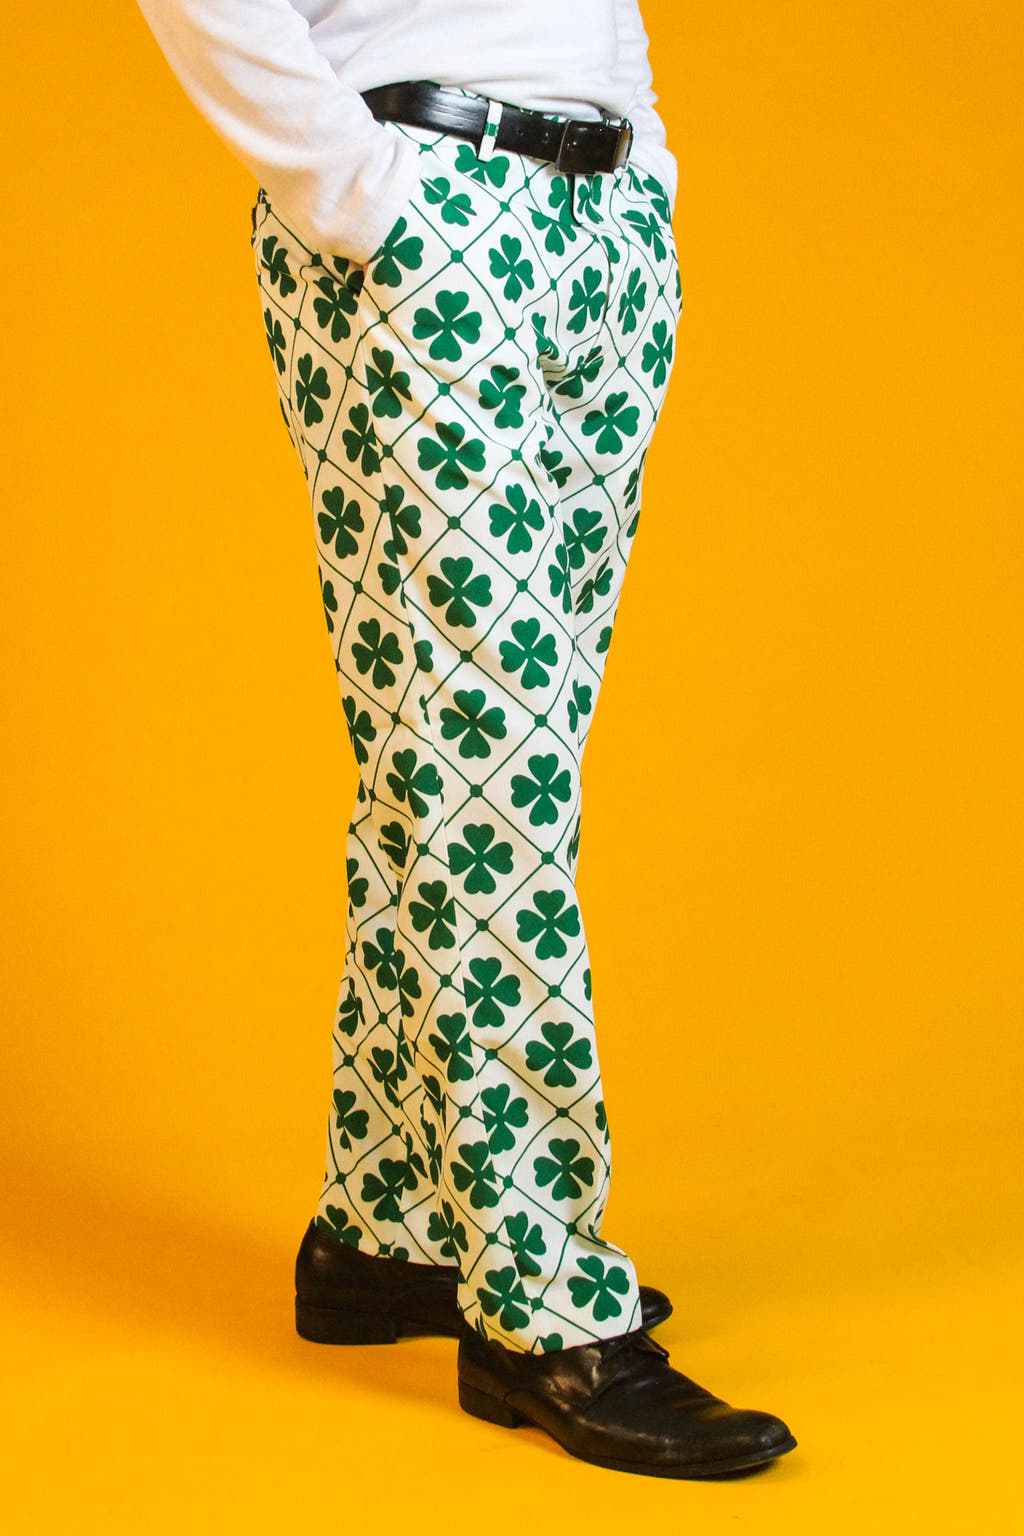 A person wearing a four-leaf clover suit with a clover pattern, belt, and shoe.